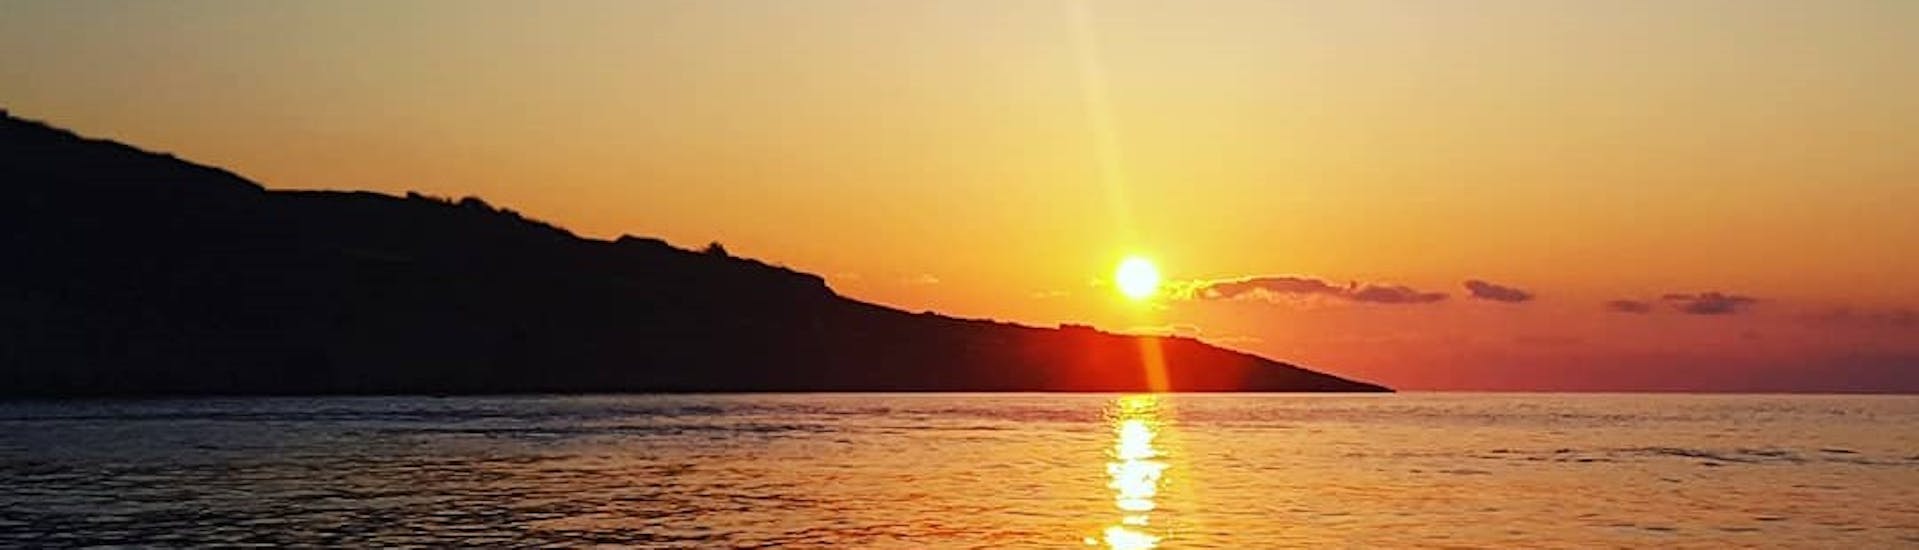 The views of the sunset in the Mediterranean sea during a Private Boat Trip to Comino & Gozo Islands at Sunset with Outdoor Explorers.